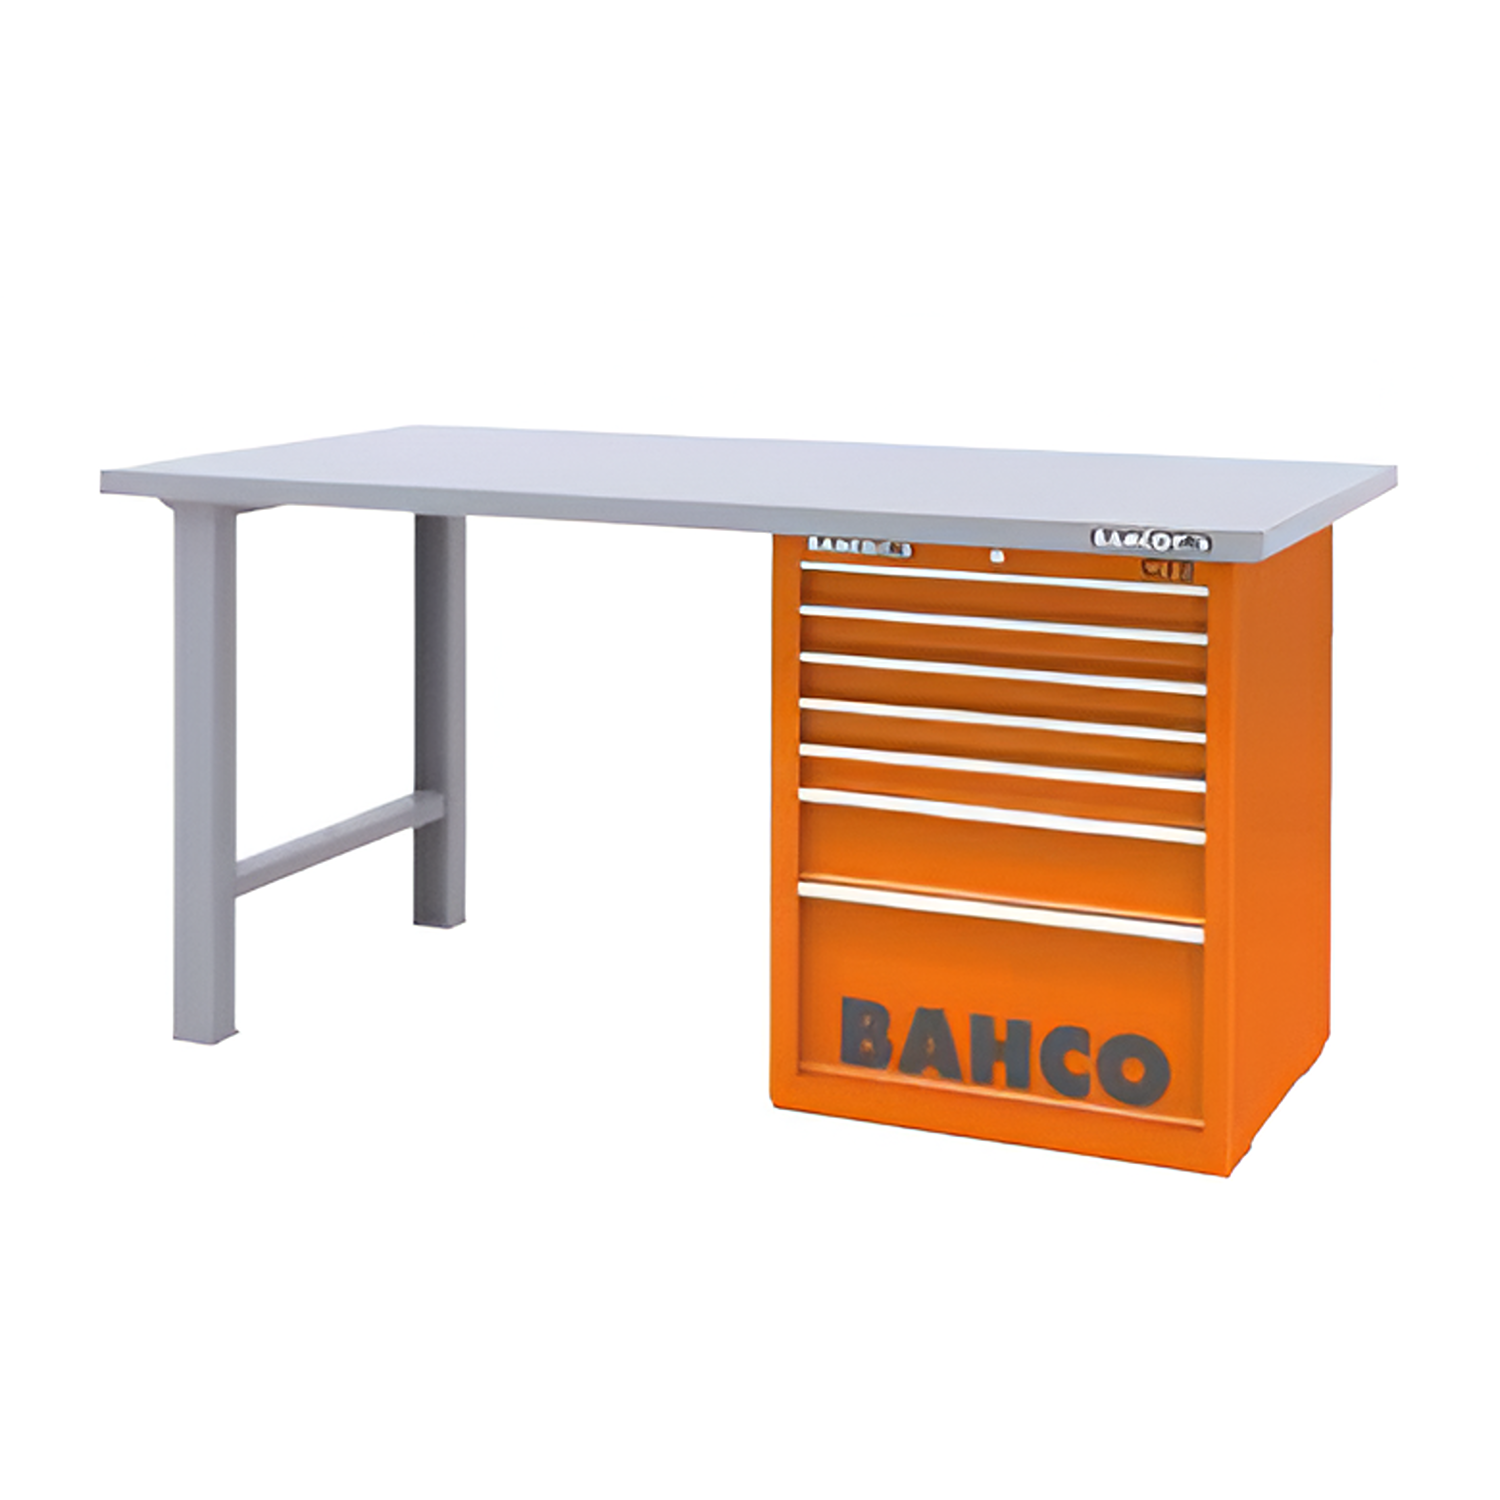 BAHCO 1495KH7WBTS Heavy Duty Workbench with Steel & Tool Trolleys - Premium Workbench from BAHCO - Shop now at Yew Aik.